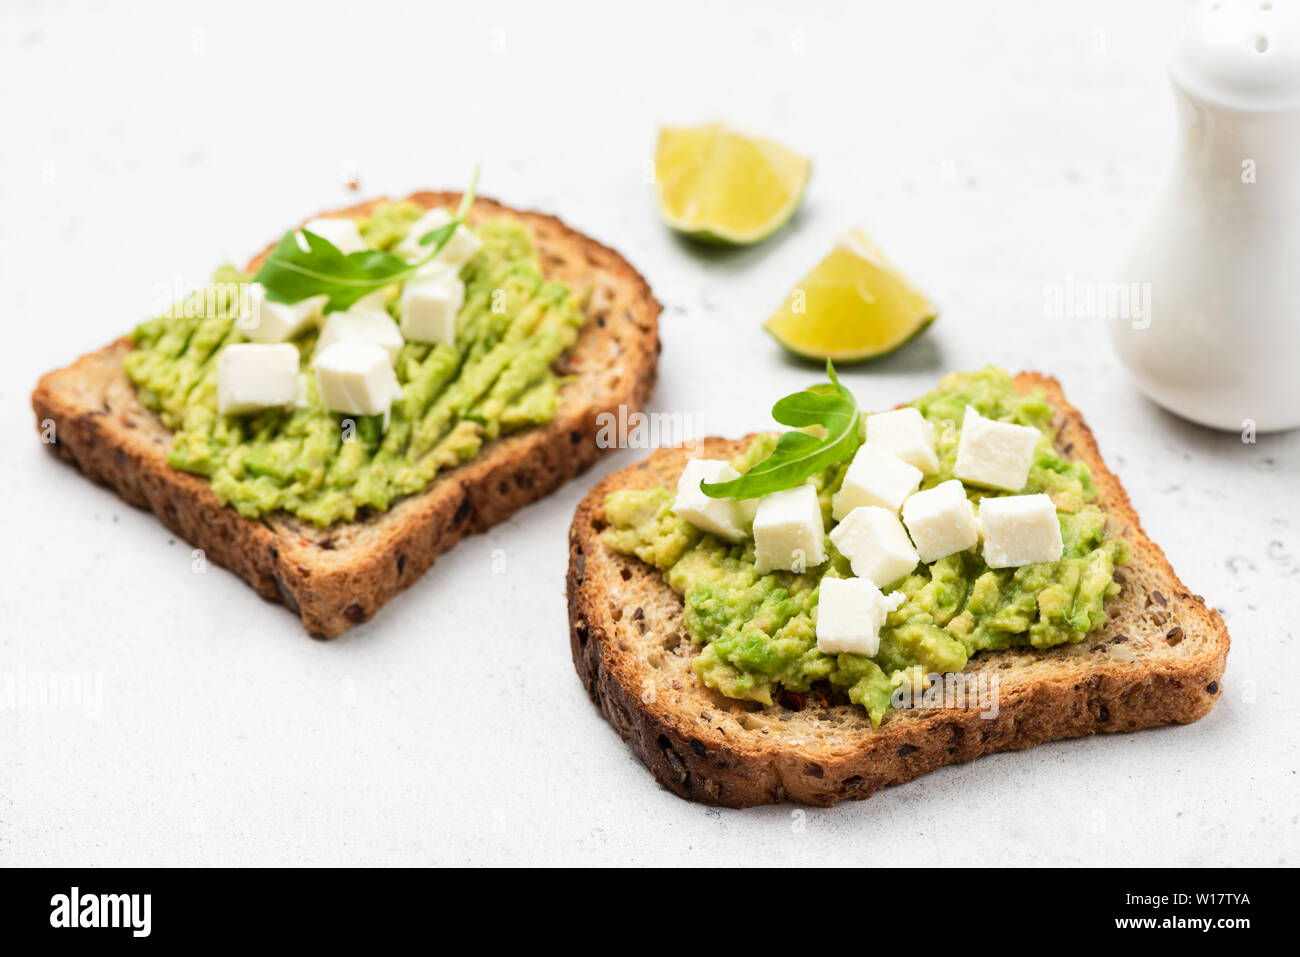 Bread toast with mashed avocado and feta cheese. Healthy breakfast or snack Stock Photo